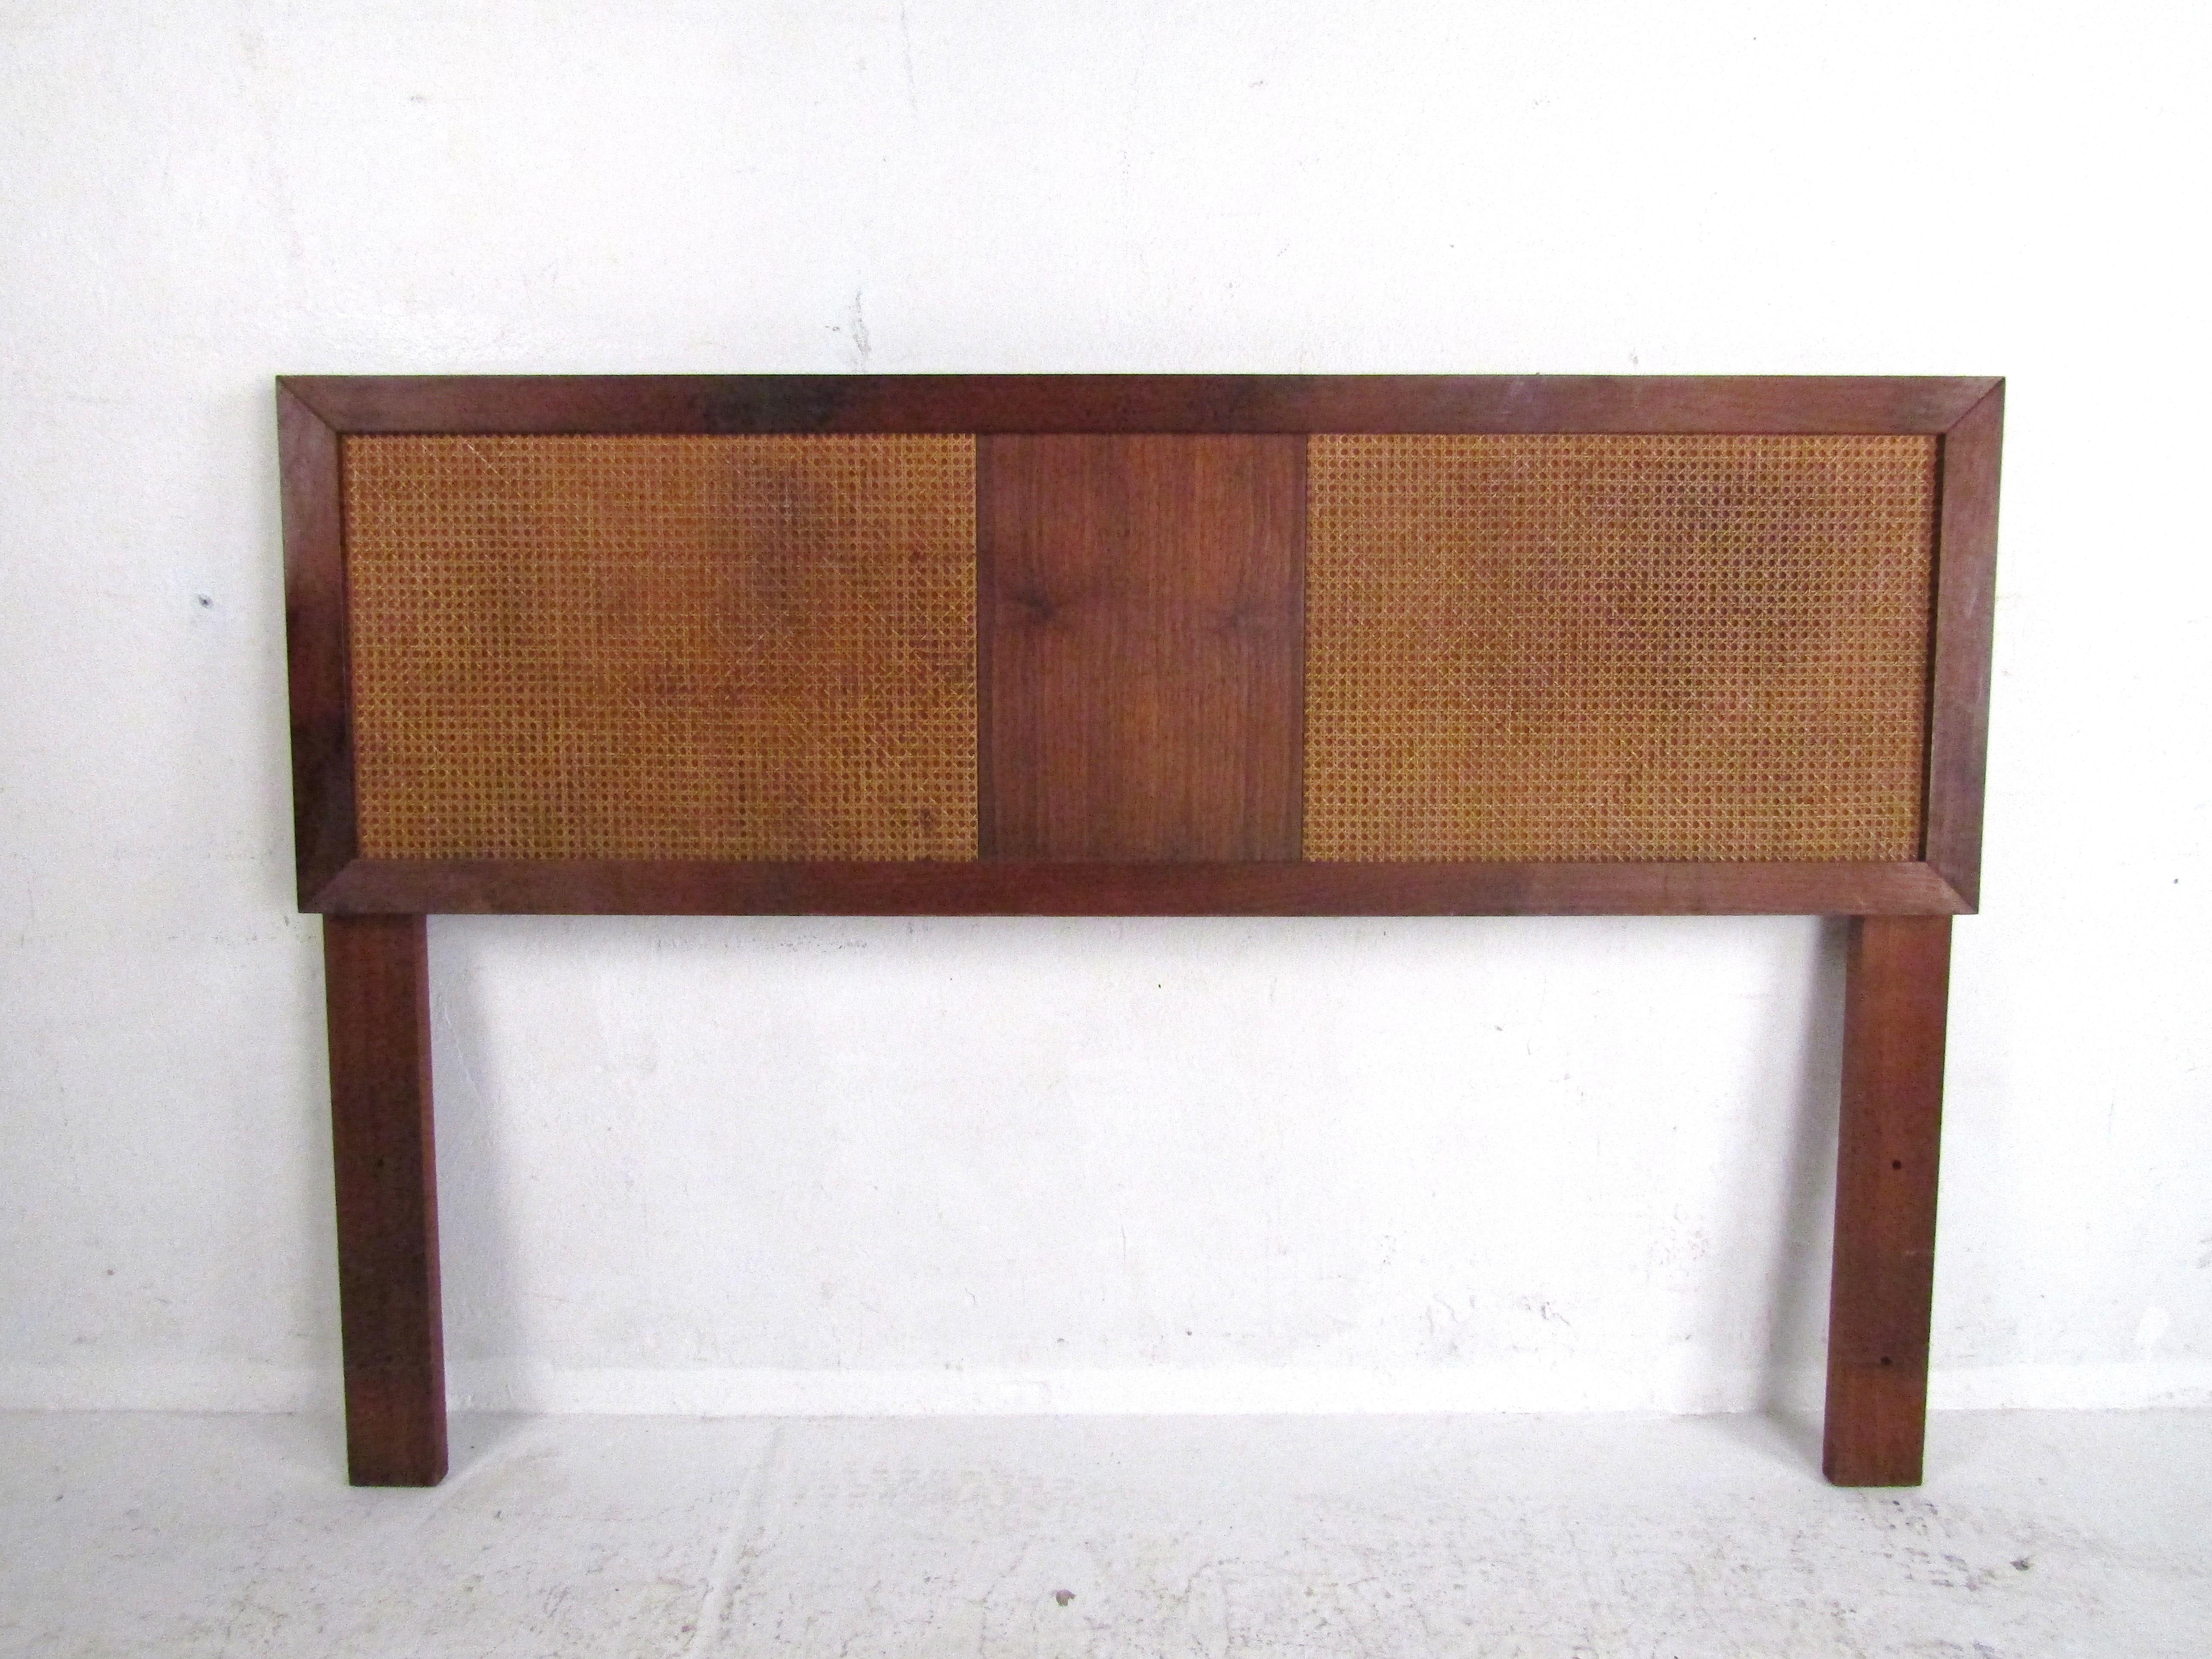 Stylish Mid-Century Modern headboard with cane accents. Sturdy construction. Great addition to any modern interior. Please confirm item location with dealer (NJ or NY).